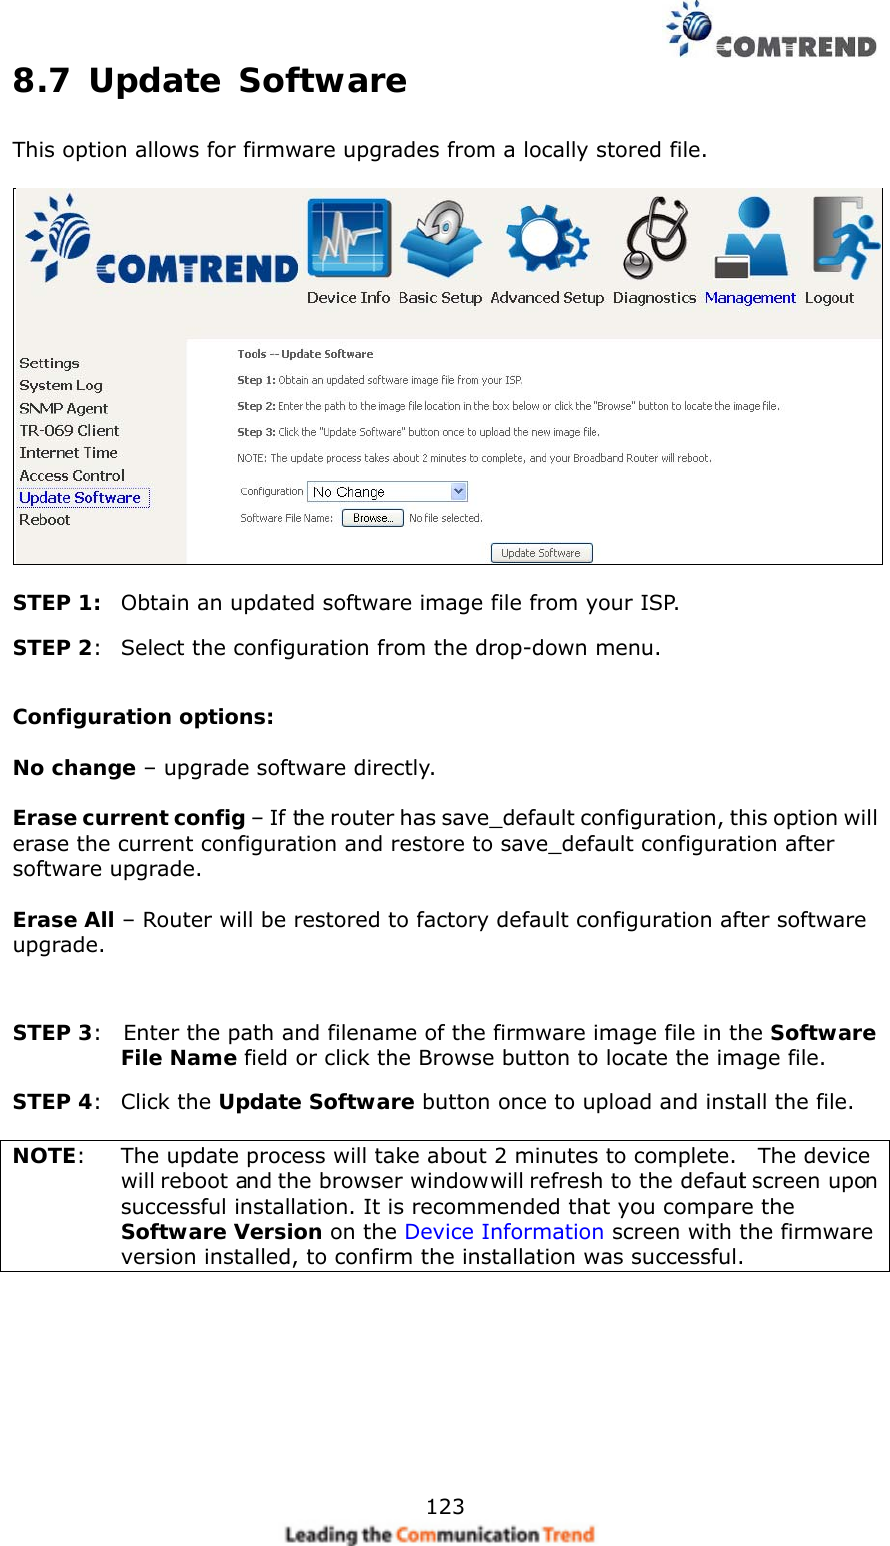    1238.7 Update Software This option allows for firmware upgrades from a locally stored file.    STEP 1:  Obtain an updated software image file from your ISP. STEP 2:   Select the configuration from the drop-down menu.  Configuration options:   No change – upgrade software directly.  Erase current config – If the router has save_default configuration, this option will erase the current configuration and restore to save_default configuration after software upgrade.  Erase All – Router will be restored to factory default configuration after software upgrade.  STEP 3:    Enter the path and filename of the firmware image file in the Software File Name field or click the Browse button to locate the image file. STEP 4:  Click the Update Software button once to upload and install the file.  NOTE:    The update process will take about 2 minutes to complete.    The device will reboot and the browser window will refresh to the default screen upon successful installation. It is recommended that you compare the Software Version on the Device Information screen with the firmware version installed, to confirm the installation was successful.     